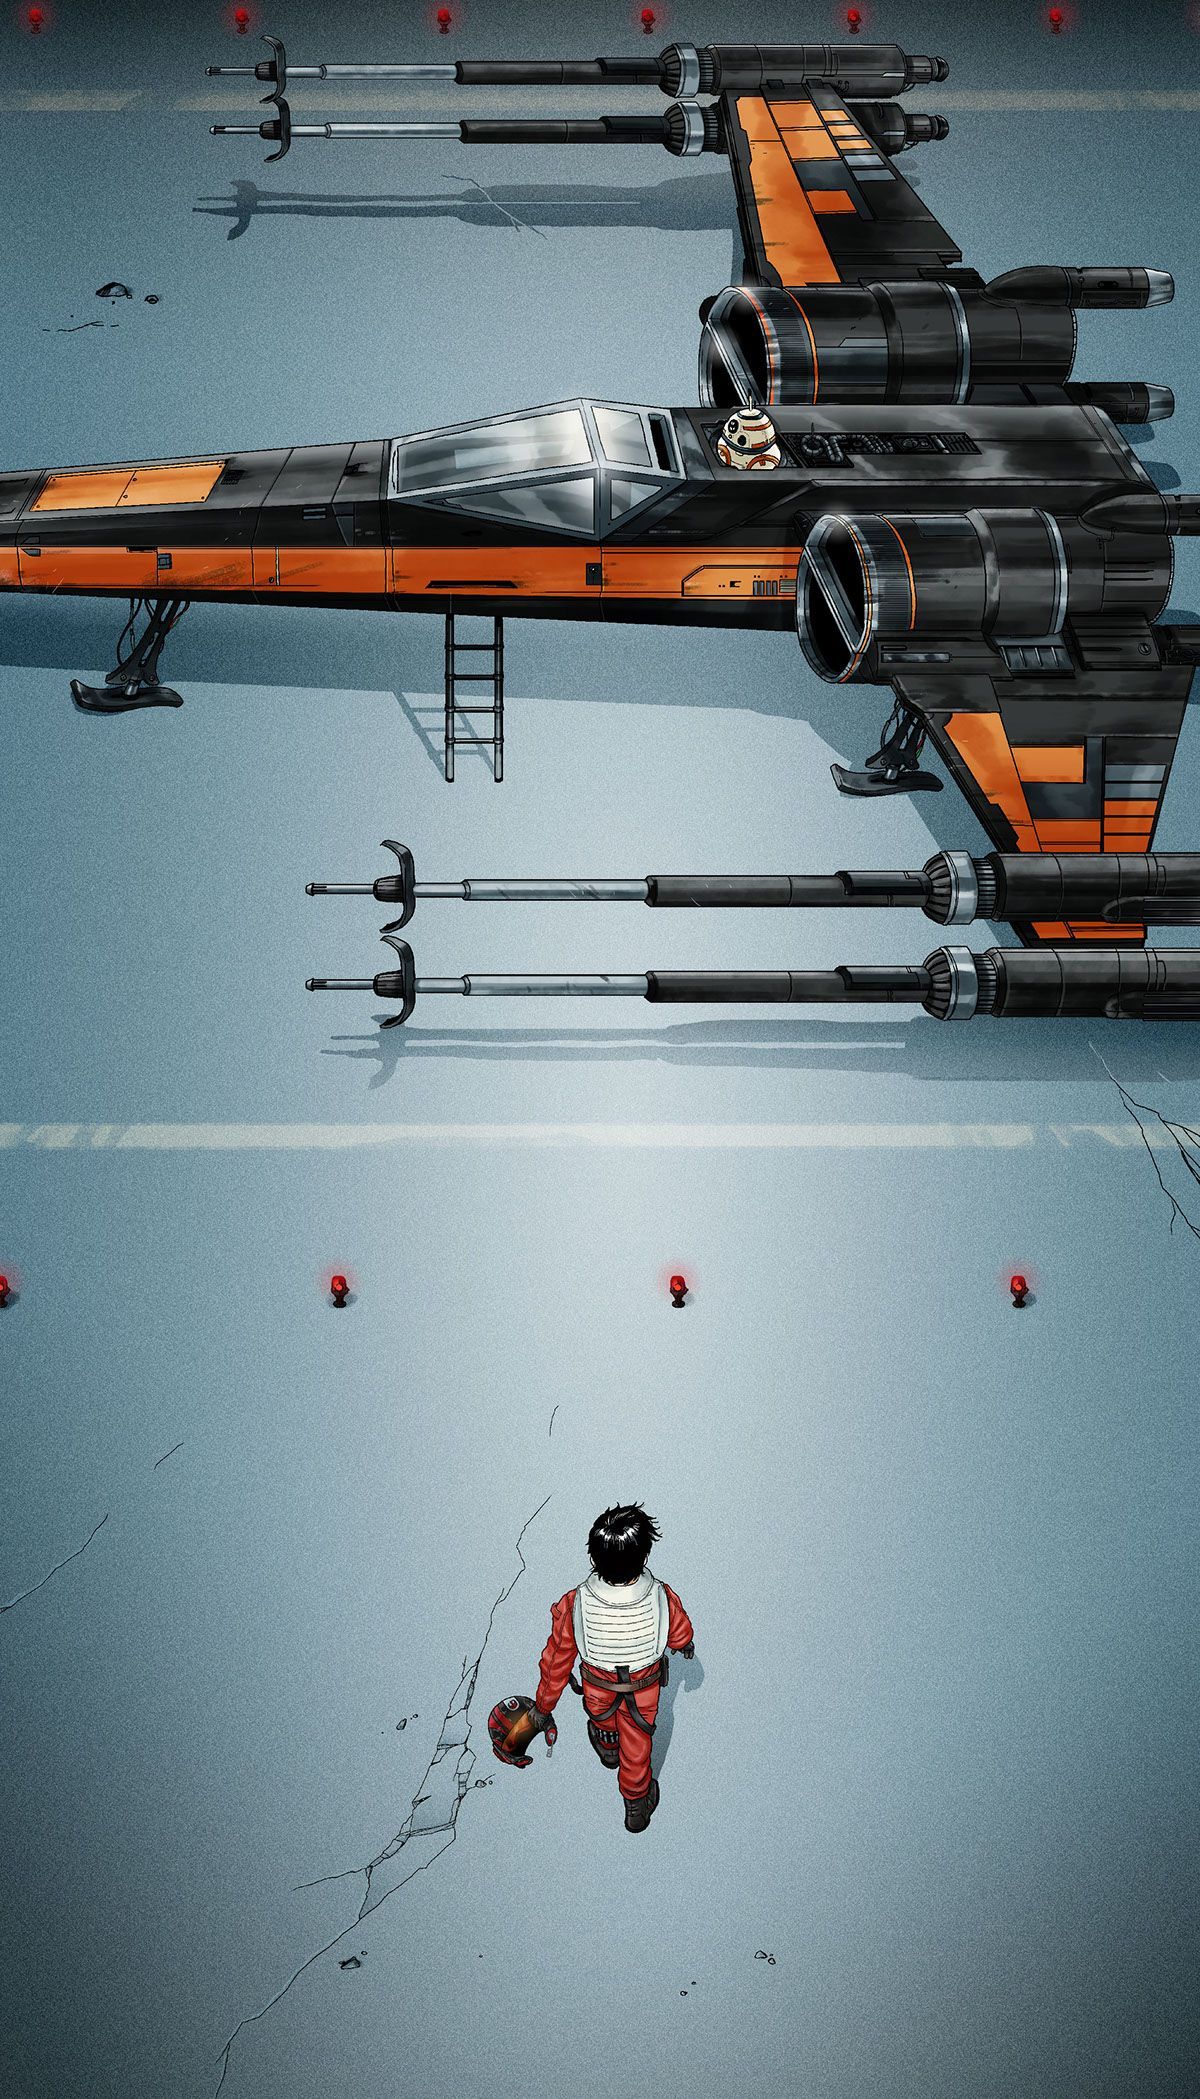 Mashup of the classic “Akira” poster image with characters and vehicle from “Star Wars: The Force Awakens.” Credit for original